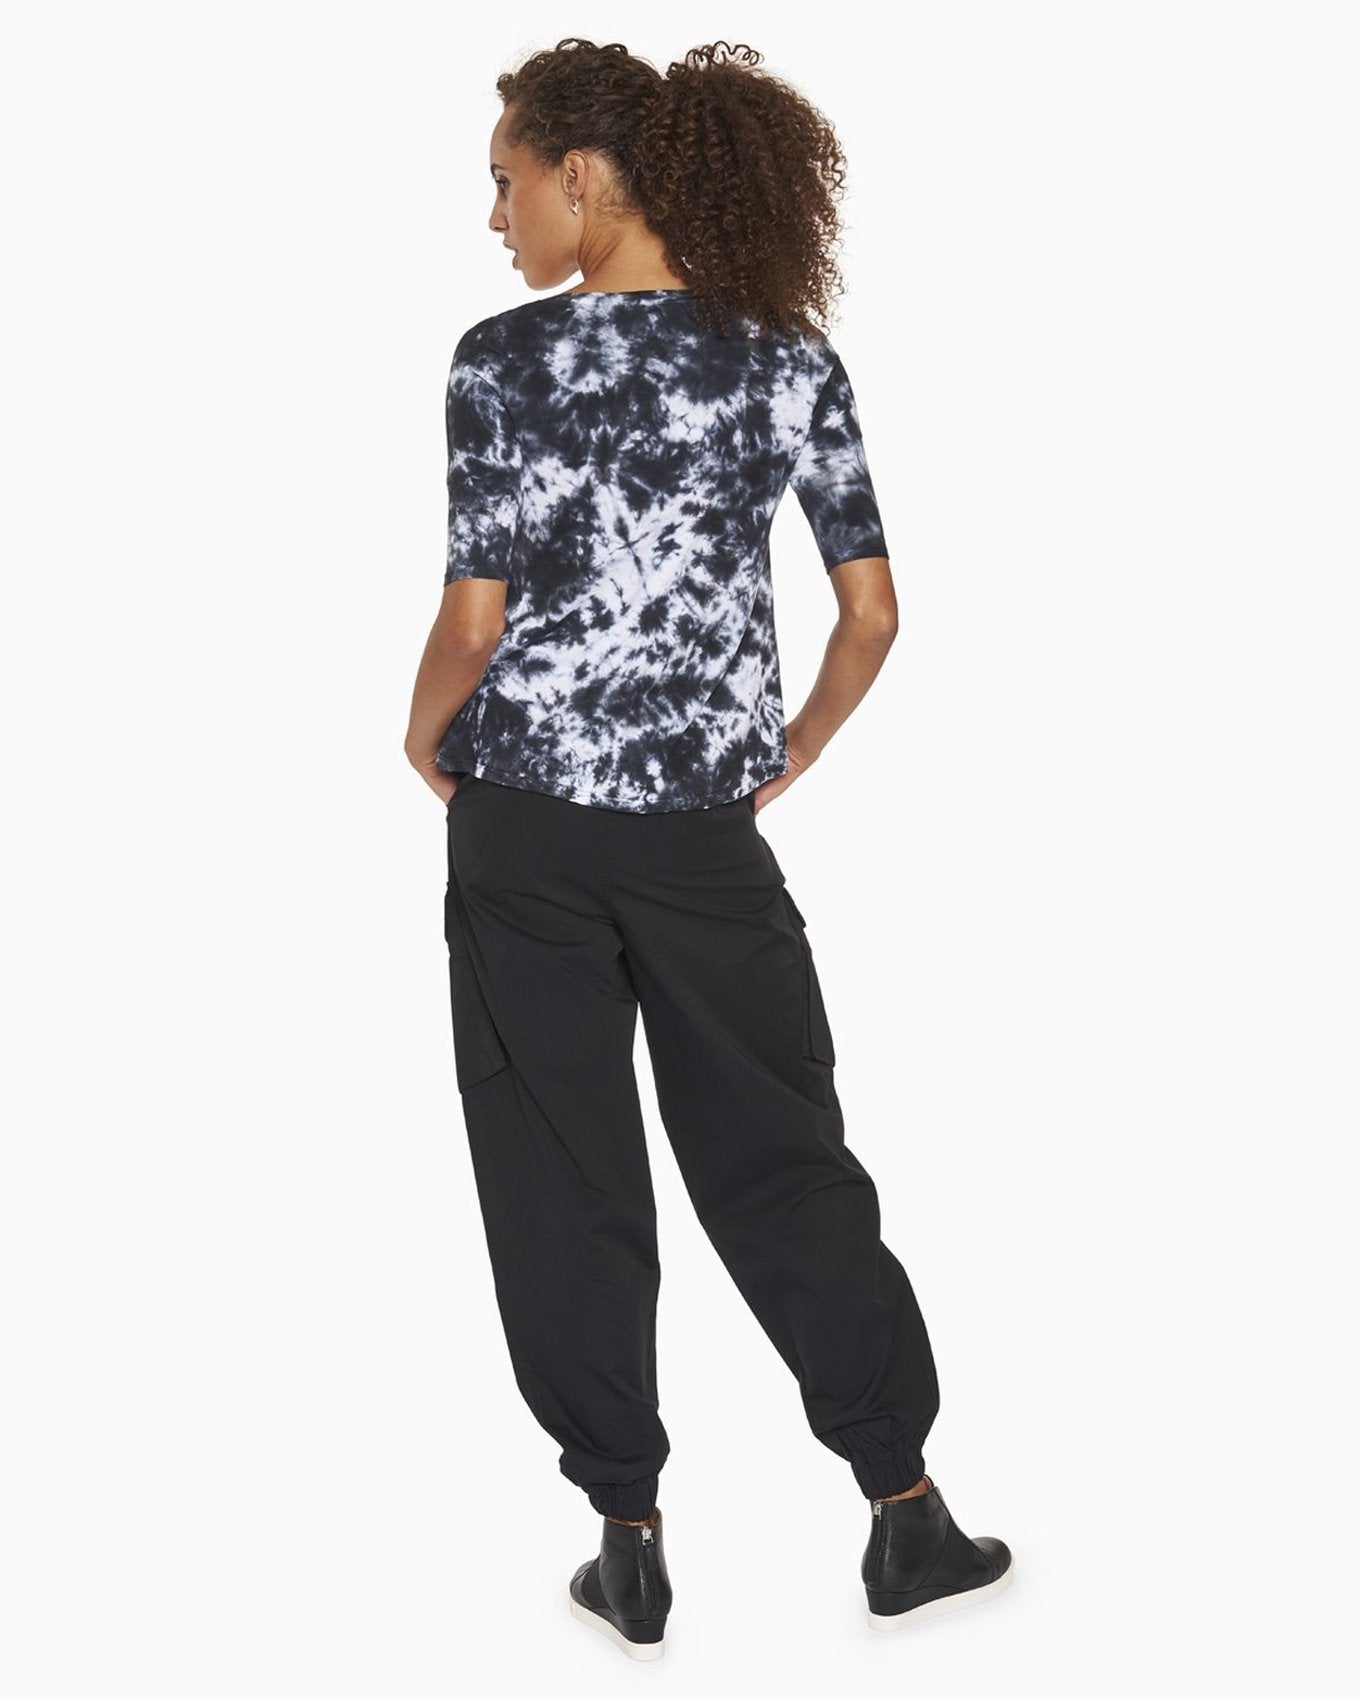 YesAnd Organic Utility Jogger Jogger in color Jet Black and shape jogger/sweatpant